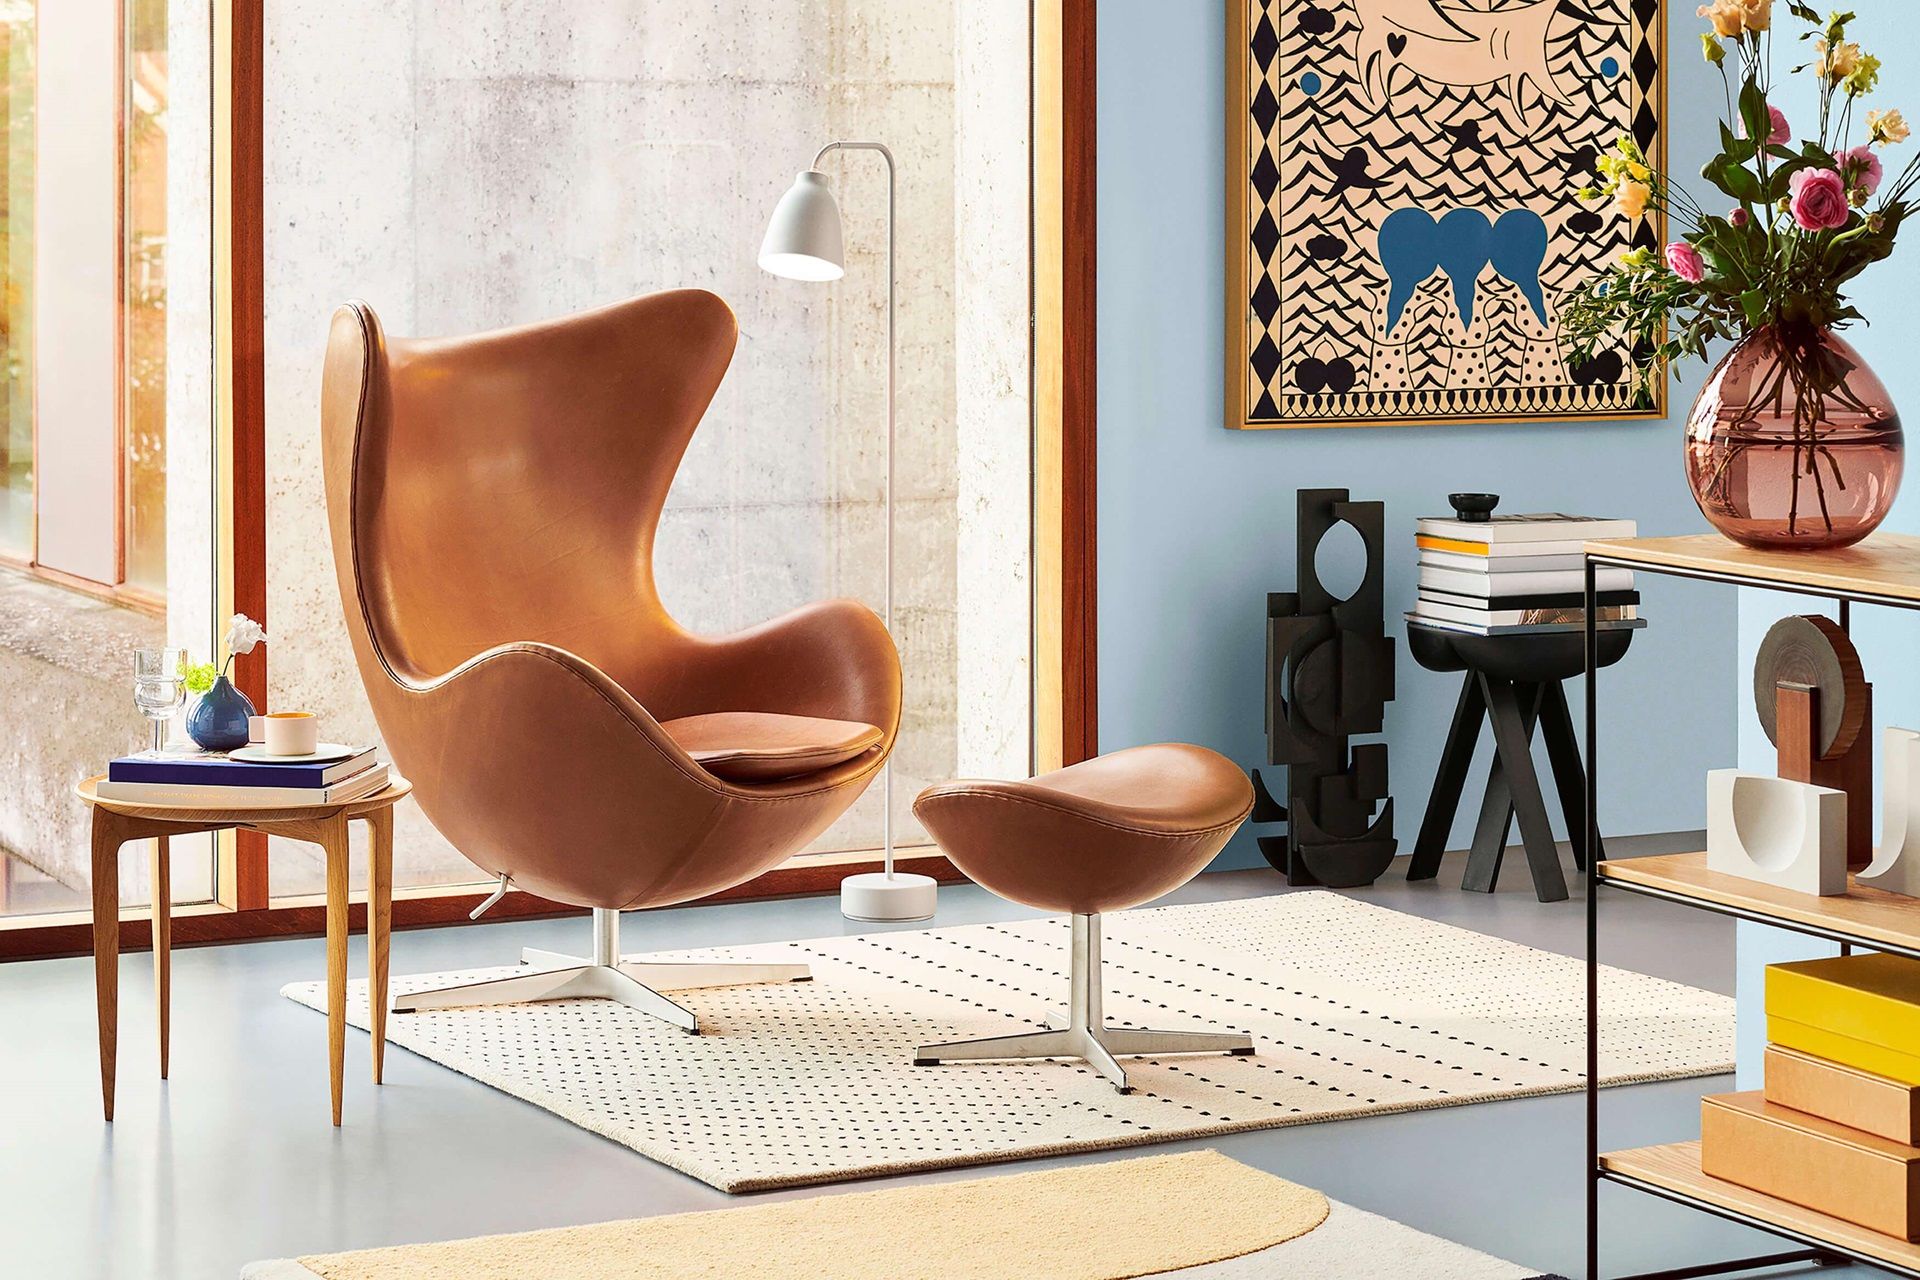 Feodaal patrouille Van Learn All About Arne Jacobsen's Iconic Midcentury Egg Chair